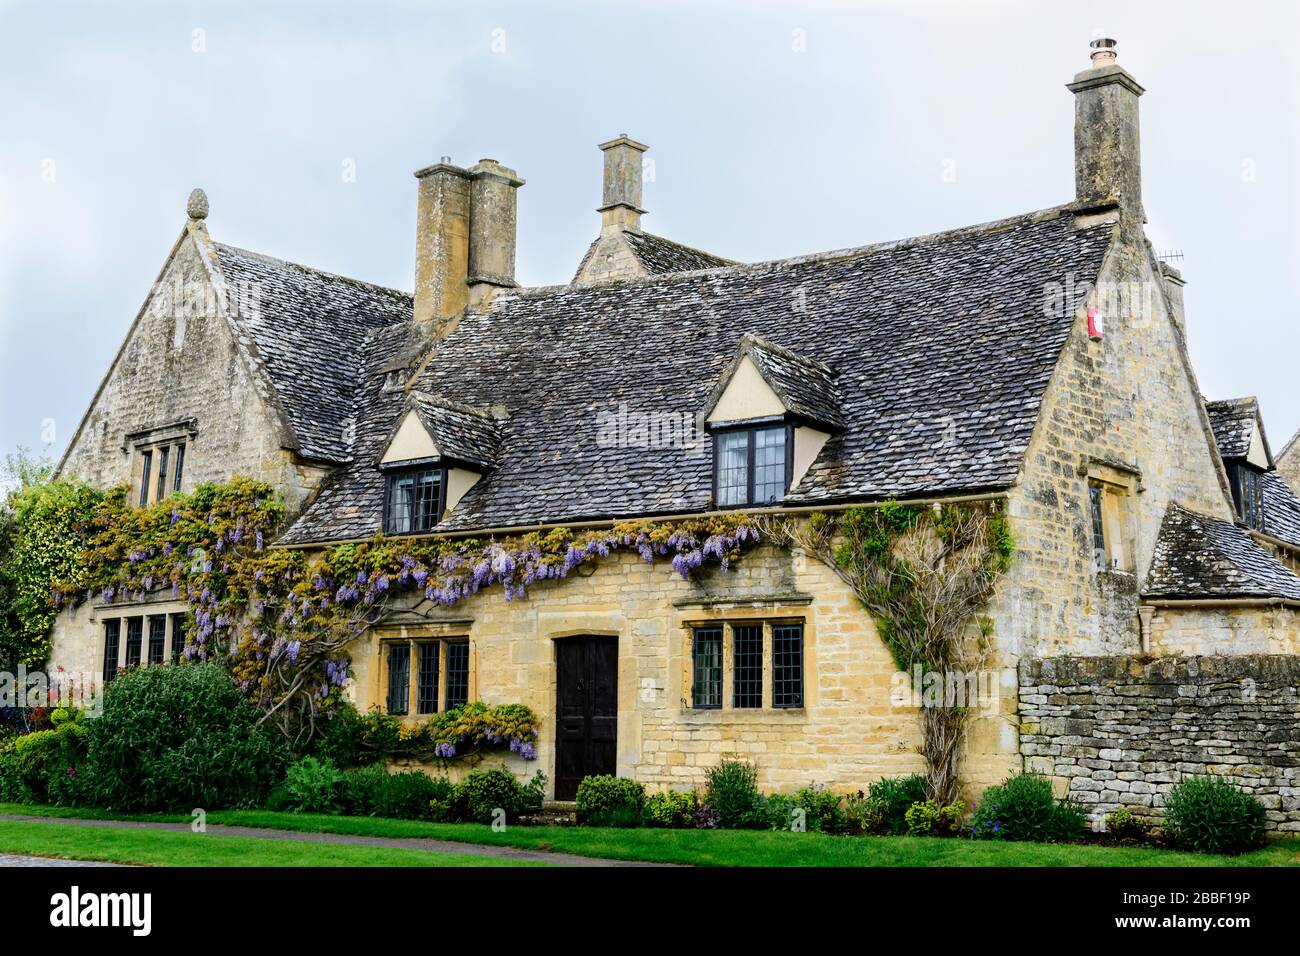 One of the many homes in Chipping Campden in the Cotswolds in England Stock Photo